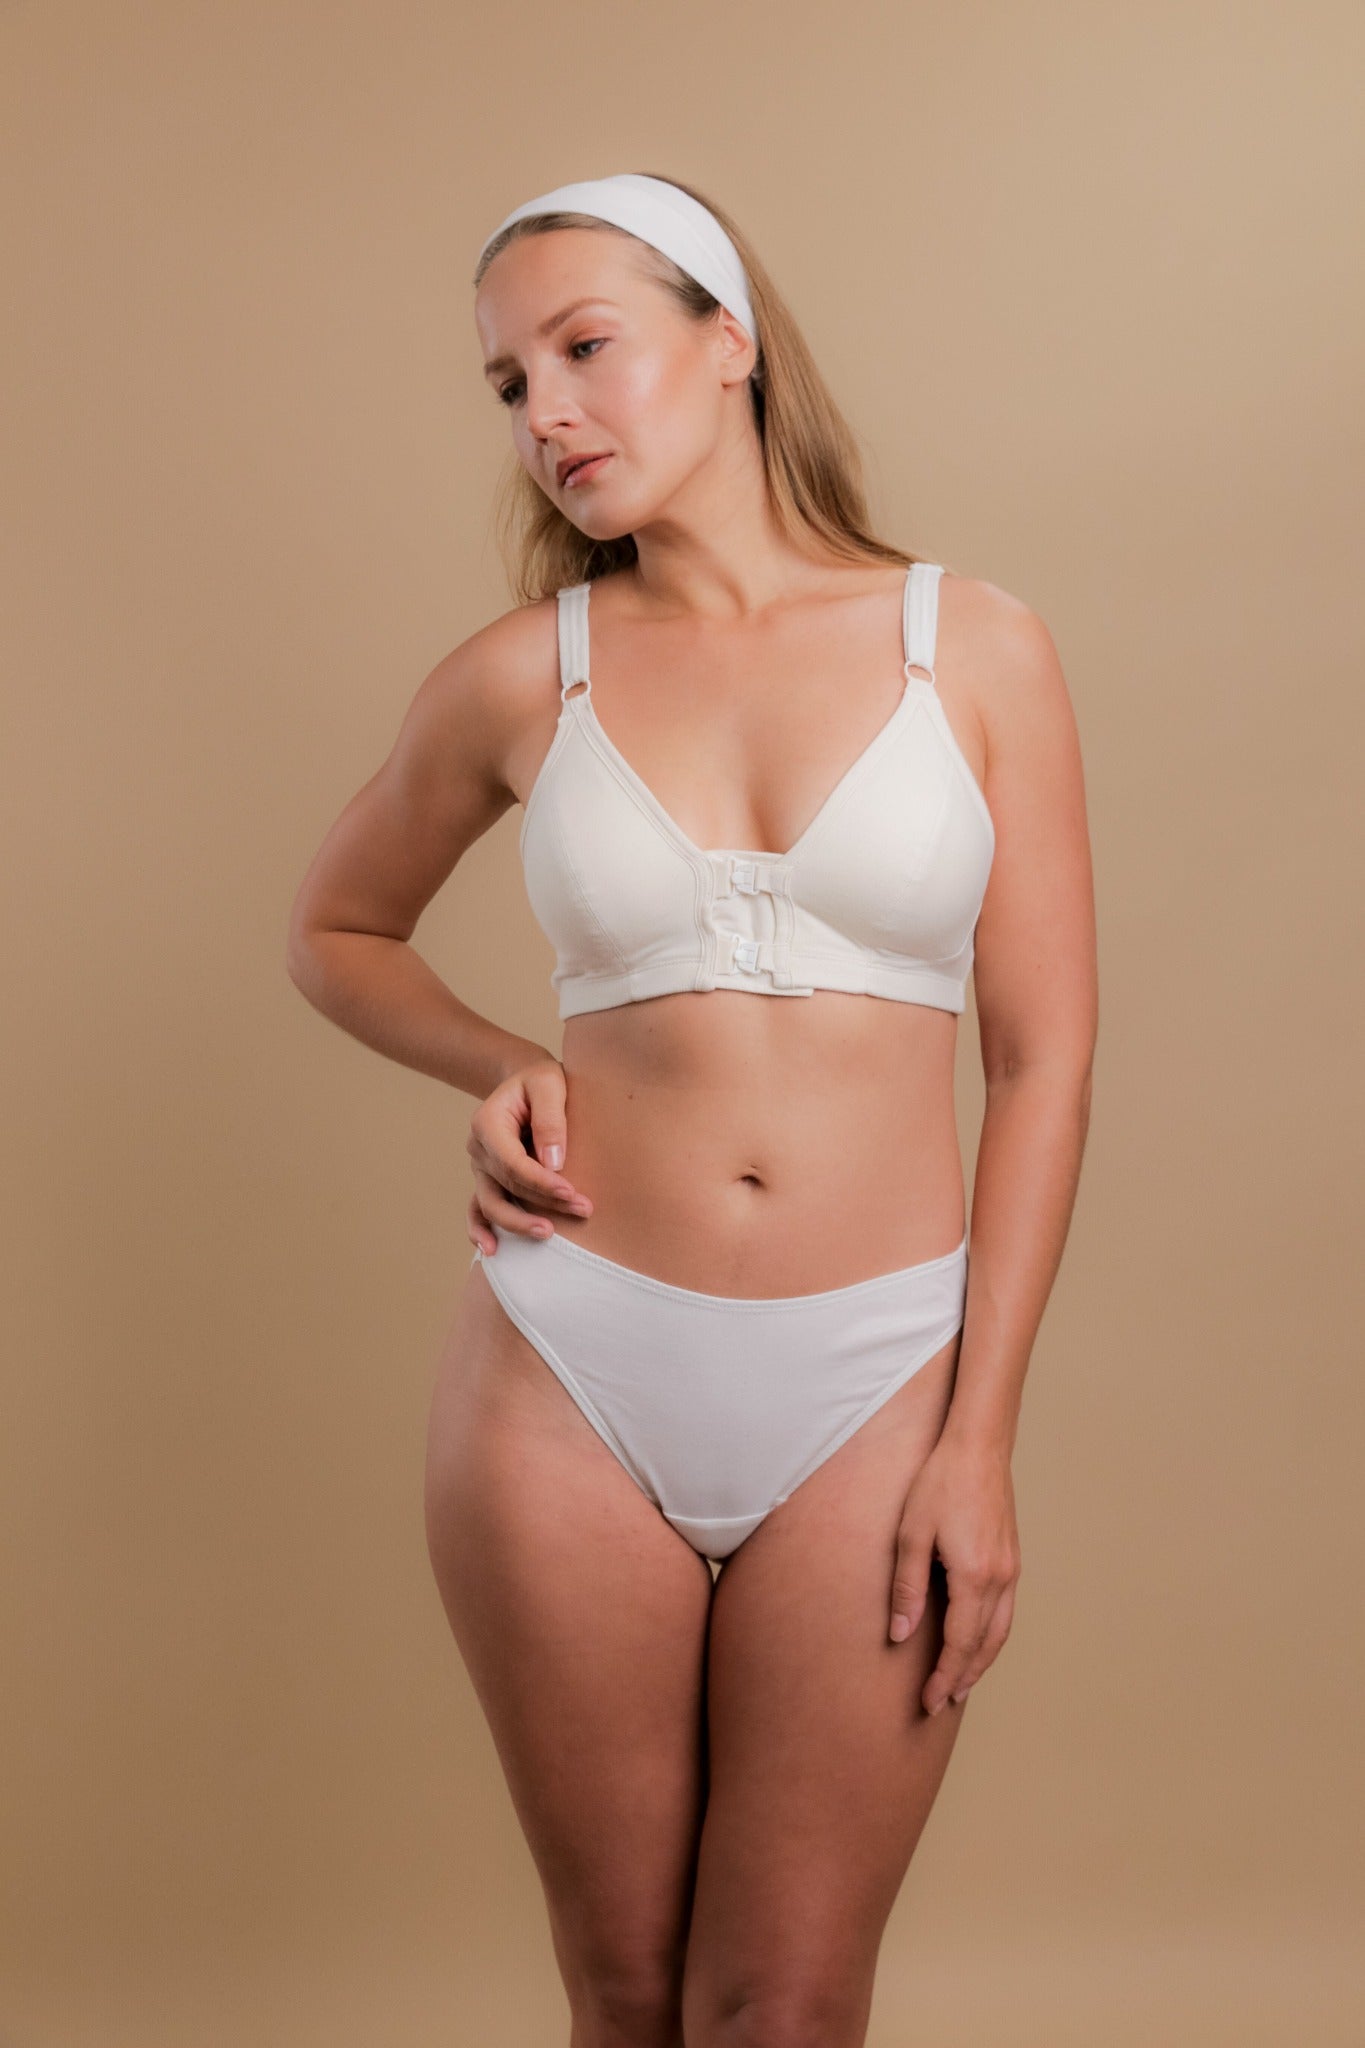 low waist breathable white free samples cotton disposable